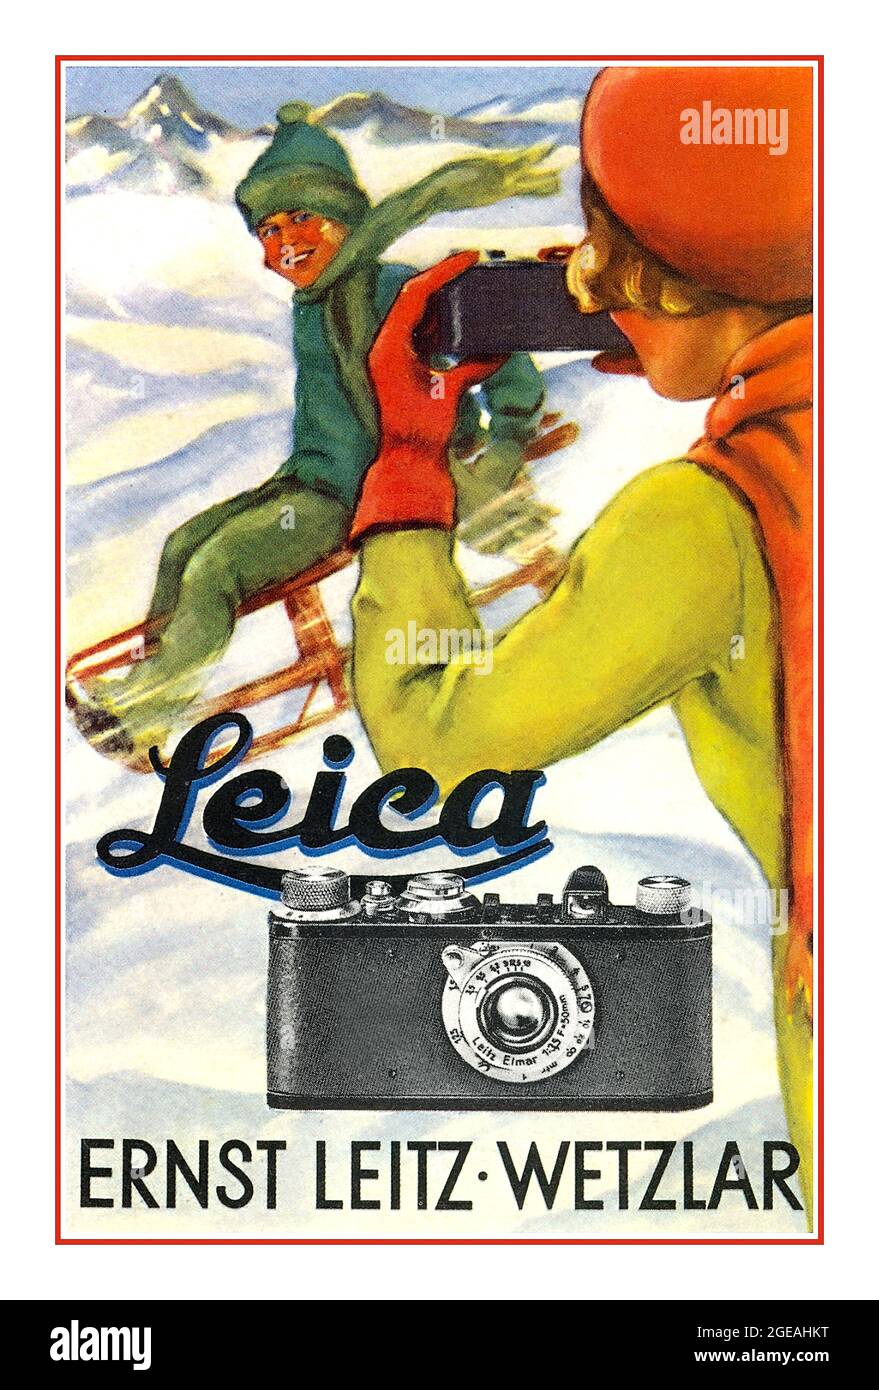 Vintage LEICA 1 (A) Early LEITZ 35mm camera press advertisement poster featuring an action winter scene 1920's original revolutionary 35mm German camera made by Ernst Leitz in Wetzlar Germany. The Leica 1(A) was the first commercially available Leica 35mm camera. The Leica, designed by Oscar Barnack, was announced in 1924 and first sold to the public in 1925. The Leica was an immediate success and was responsible for popularizing 35mm film photography. Stock Photo